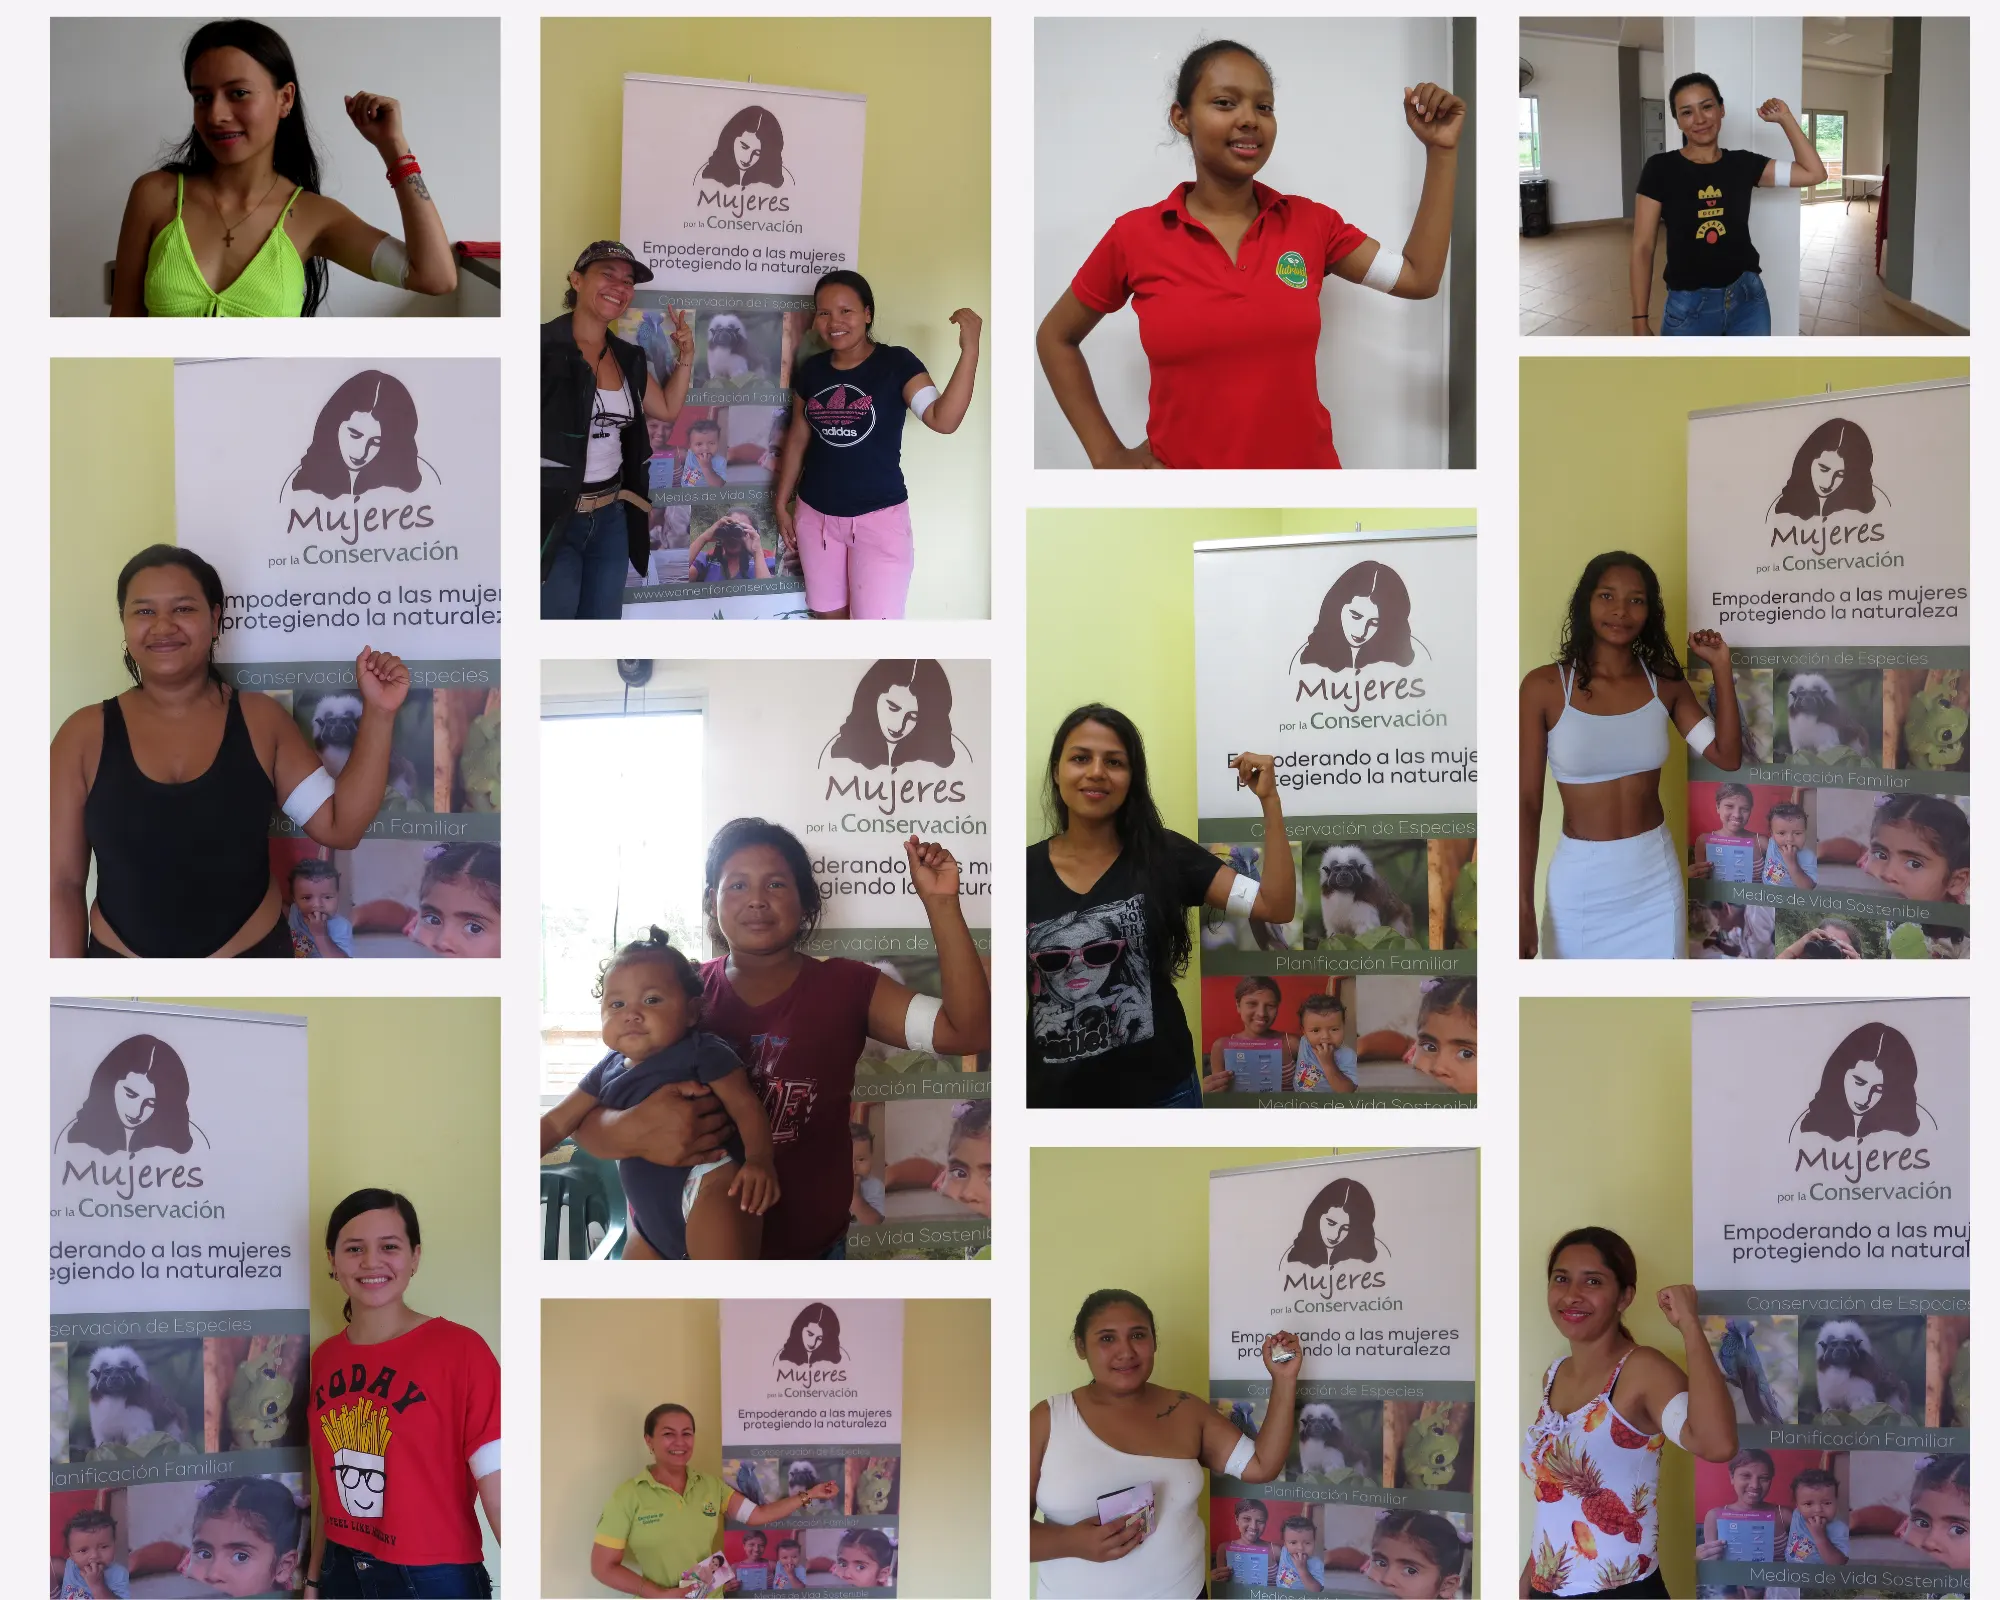 Success! 89 More Women Empowered with Reproductive Autonomy in the Amazon Rainforest